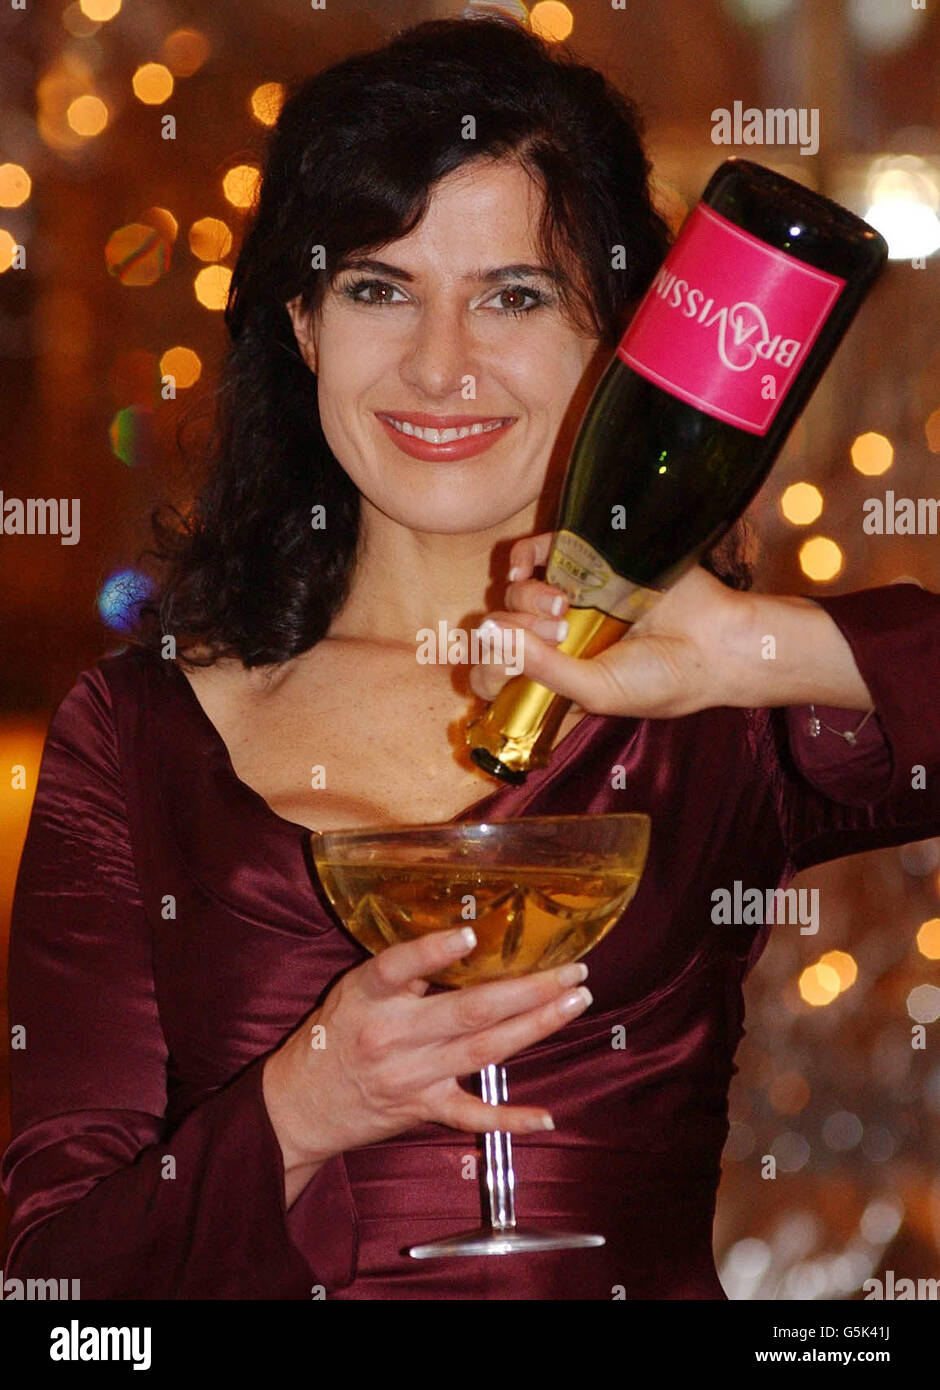 Comedienne Ronni Ancona unveils the new more voluptuous champagne glass (left) commissioned by Langerie manufacturers Bravissimo and made by Waterford Crystal, to celebrate modern women's larger chest sizes, at the Ritz, London. * The traditional 200ml champagne glass (right) is reputed to have been based on Marie Antoinette's modest decolletage (who's bust is pictured with the comedienne) with the new 550ml glass refecting the larger chest size of modern women. Stock Photo